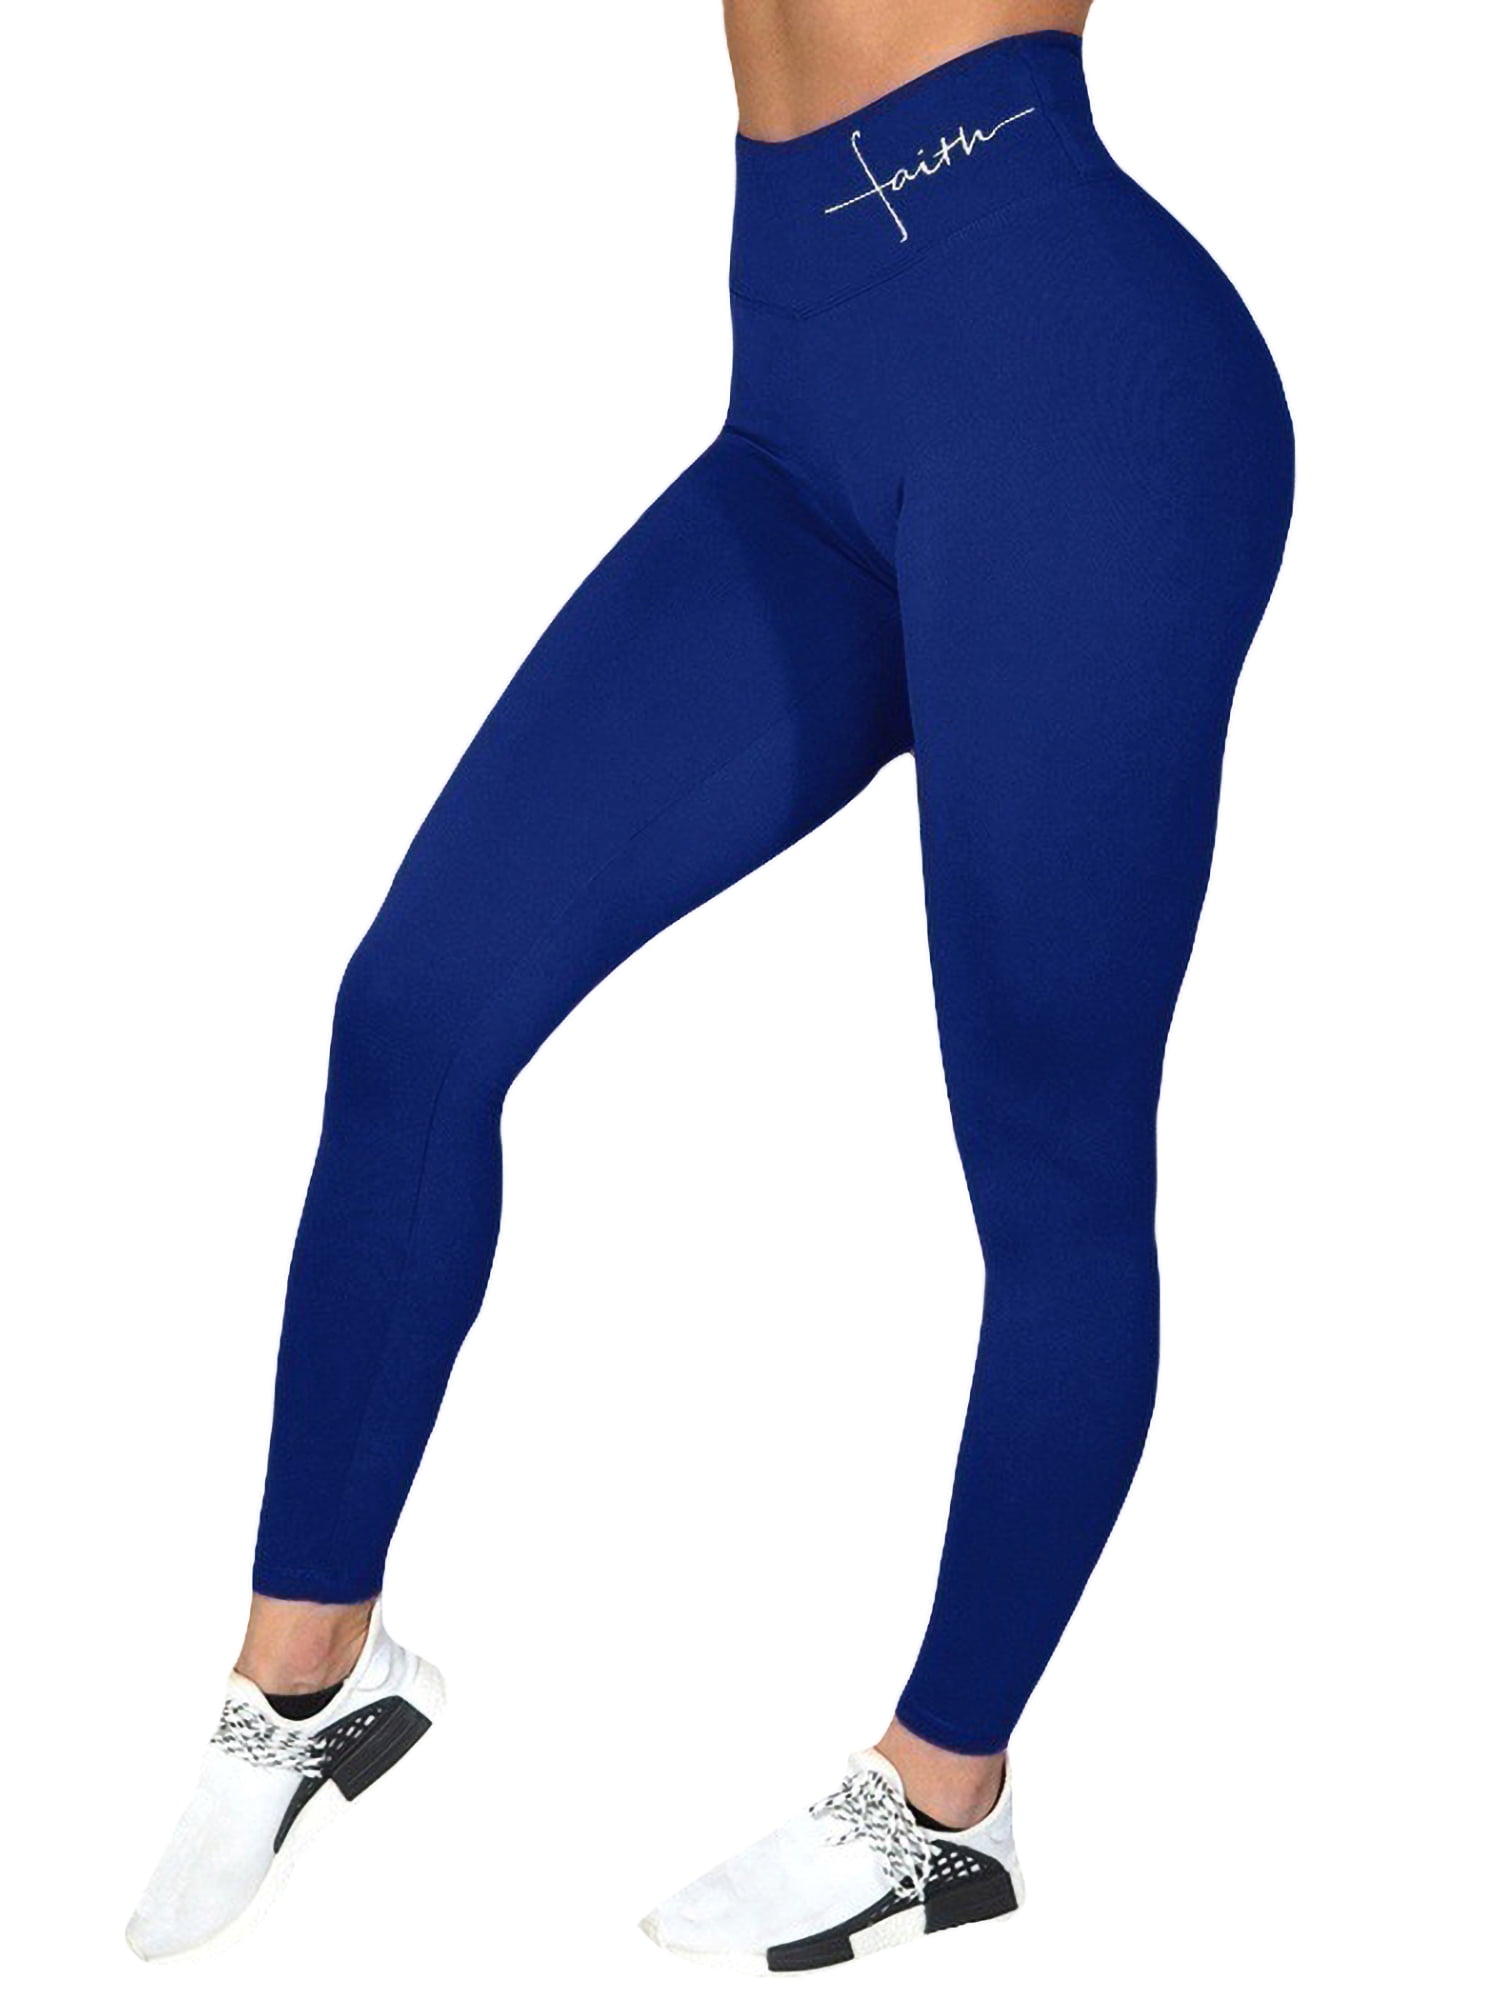 High Waisted Tummy Control Yoga Pants for Women Workout Athletic Compression Leggings for Women